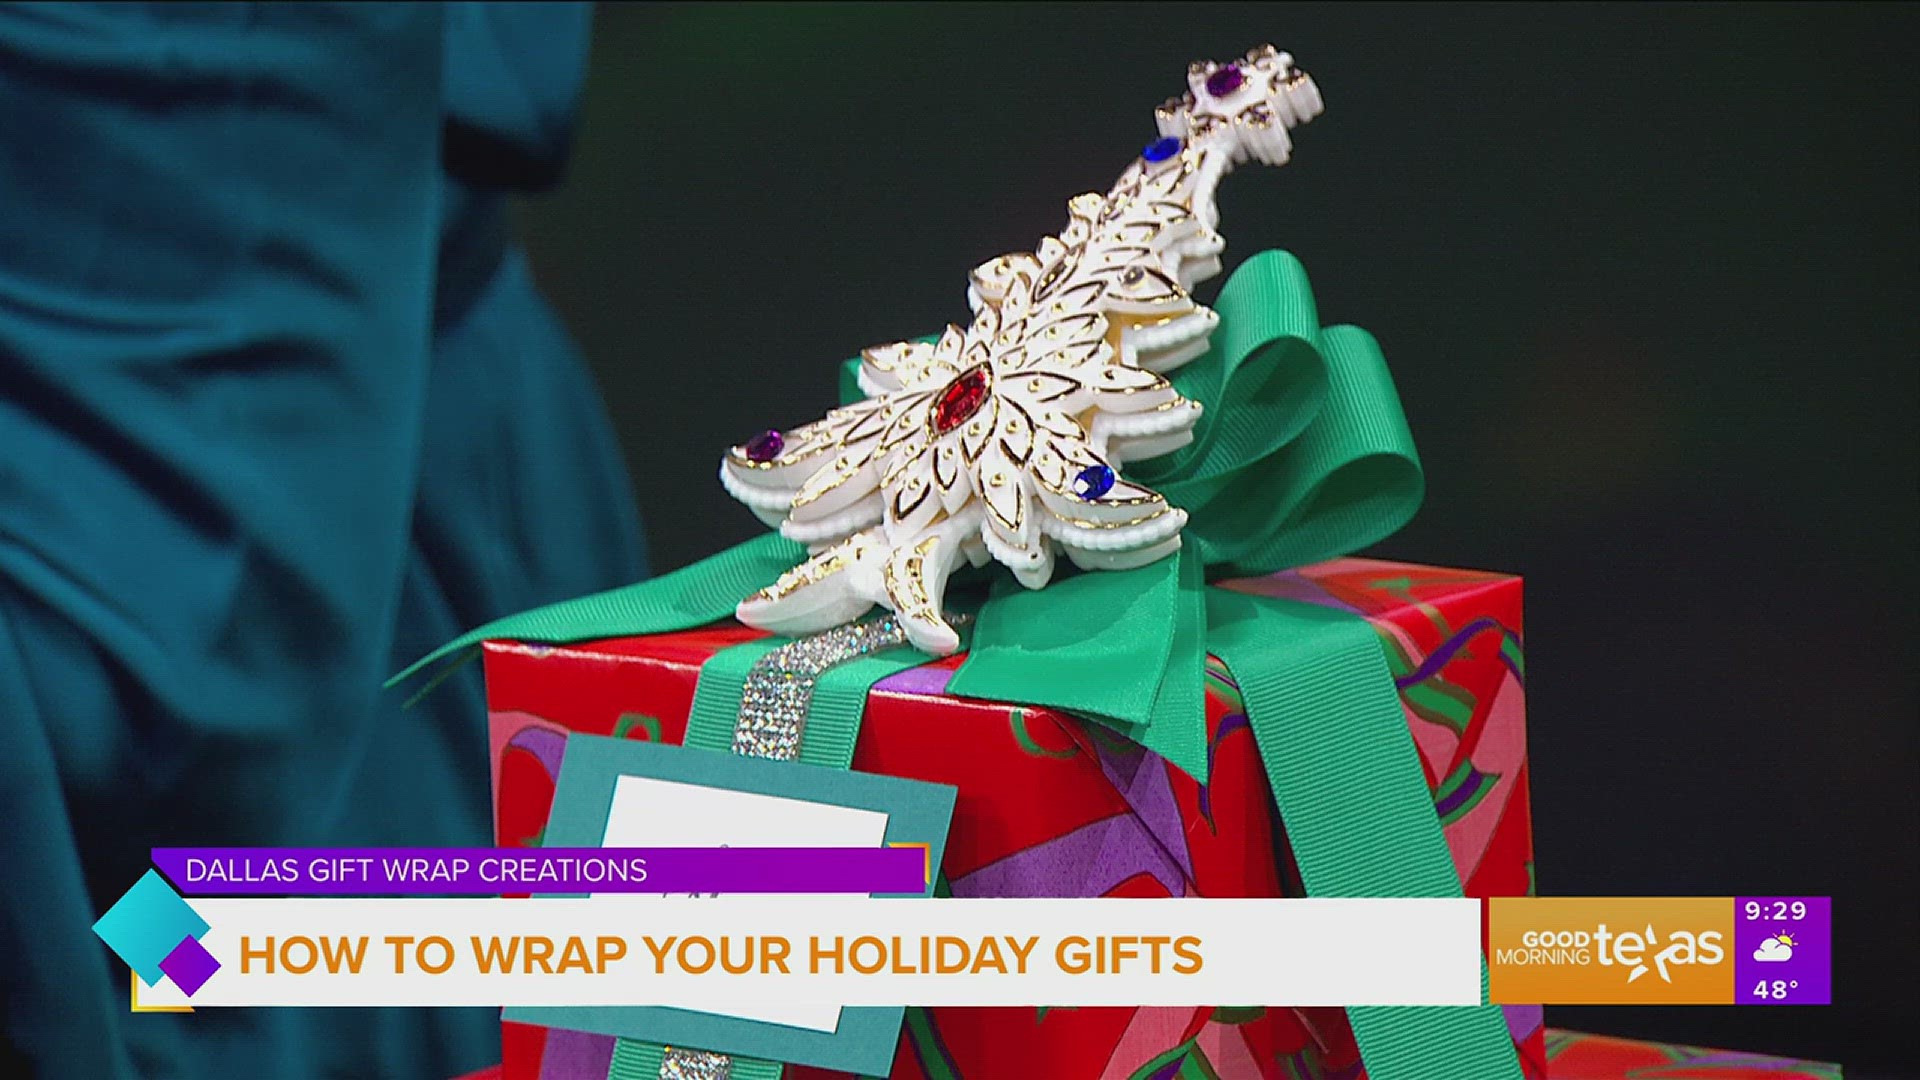 Is wrapping gifts not one of your talent? The Founder of Dallas Gift Wrap Creations shows us how to properly wrap our holiday gifts.